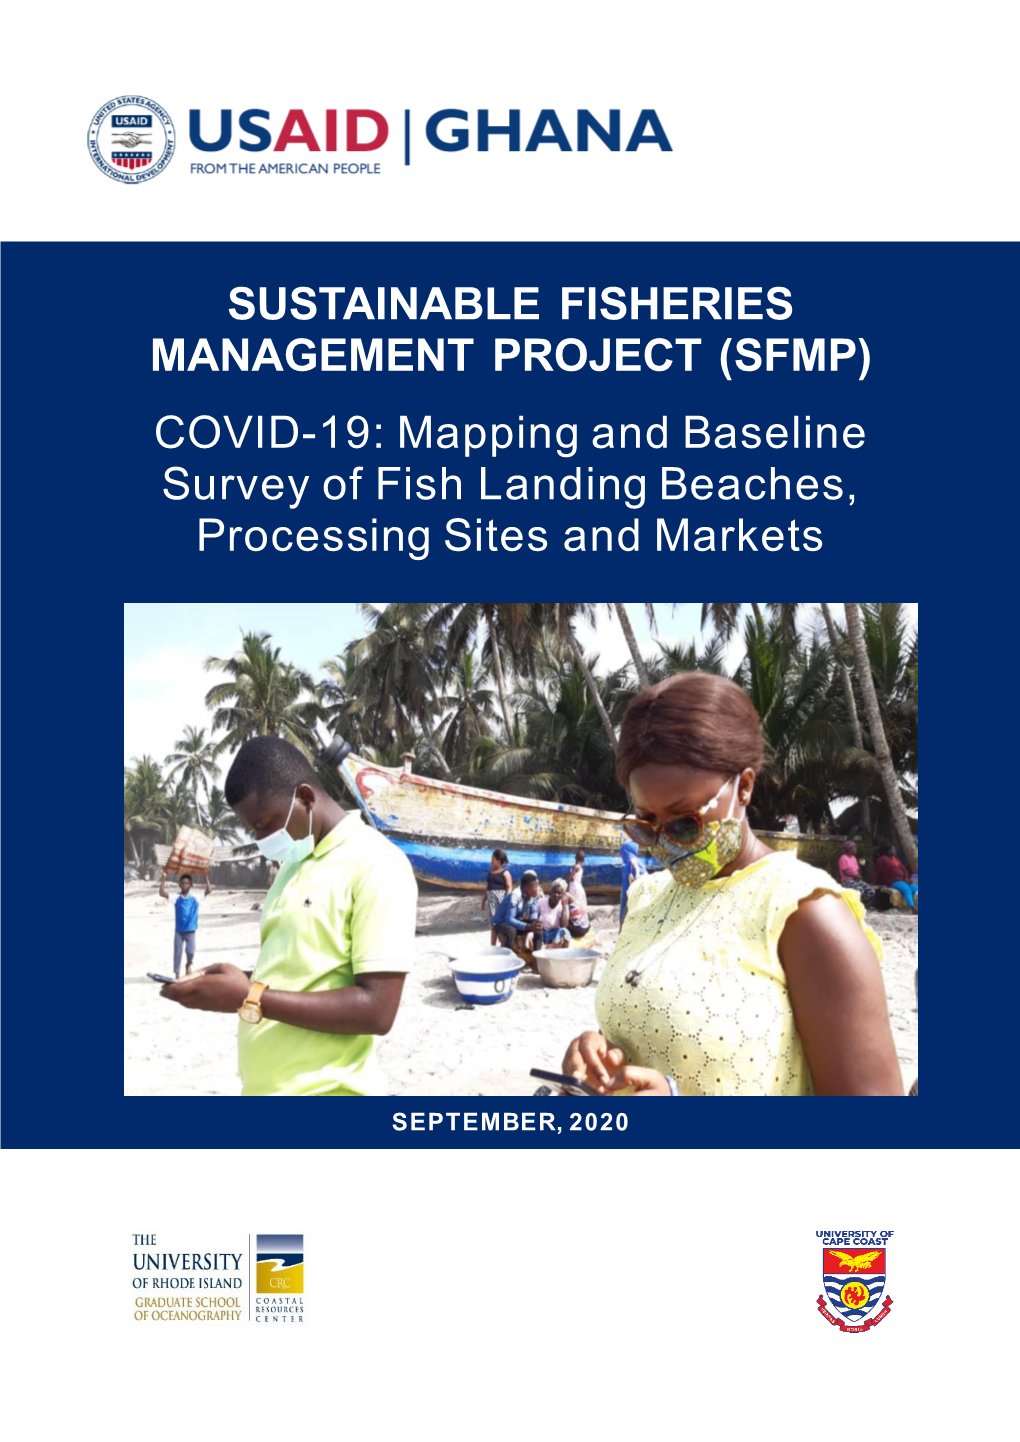 Mapping and Baseline Survey of Fish Landing Beaches, Processing Sites and Markets